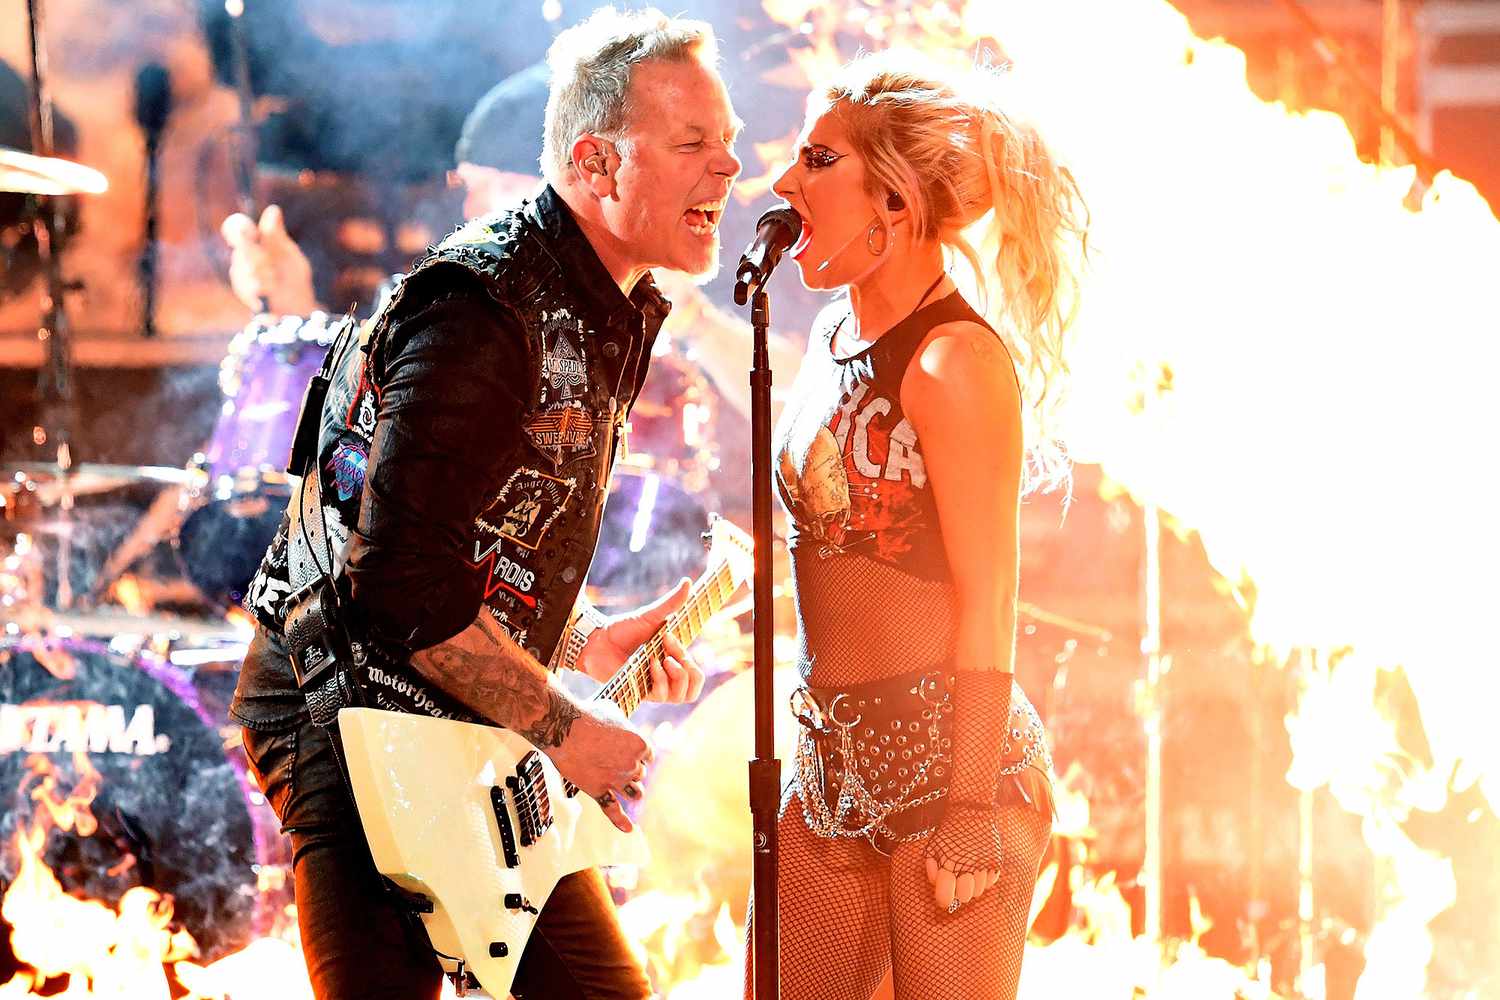 LADY GAGA CHANNELS HER INNER ROCKER TO PERFORM WITH METALLICA